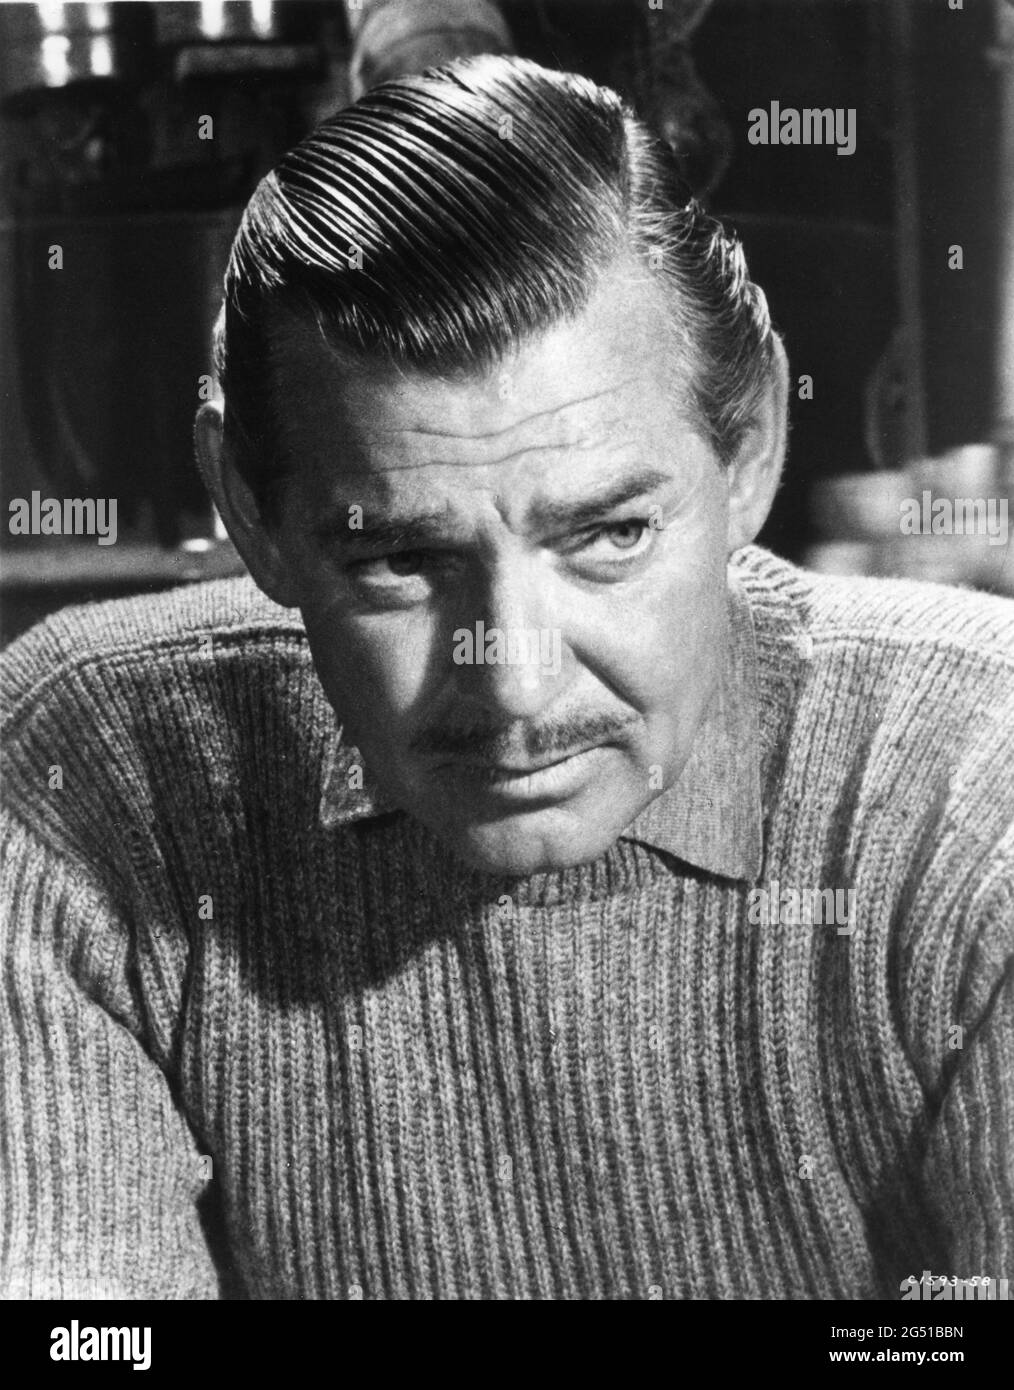 CLARK GABLE candid portrait in NEVER LET ME GO 1953 director DELMER DAVES from novel Come The Dawn by Paul Winterton producer Clarence Brown Metro Goldwyn Mayer Stock Photo